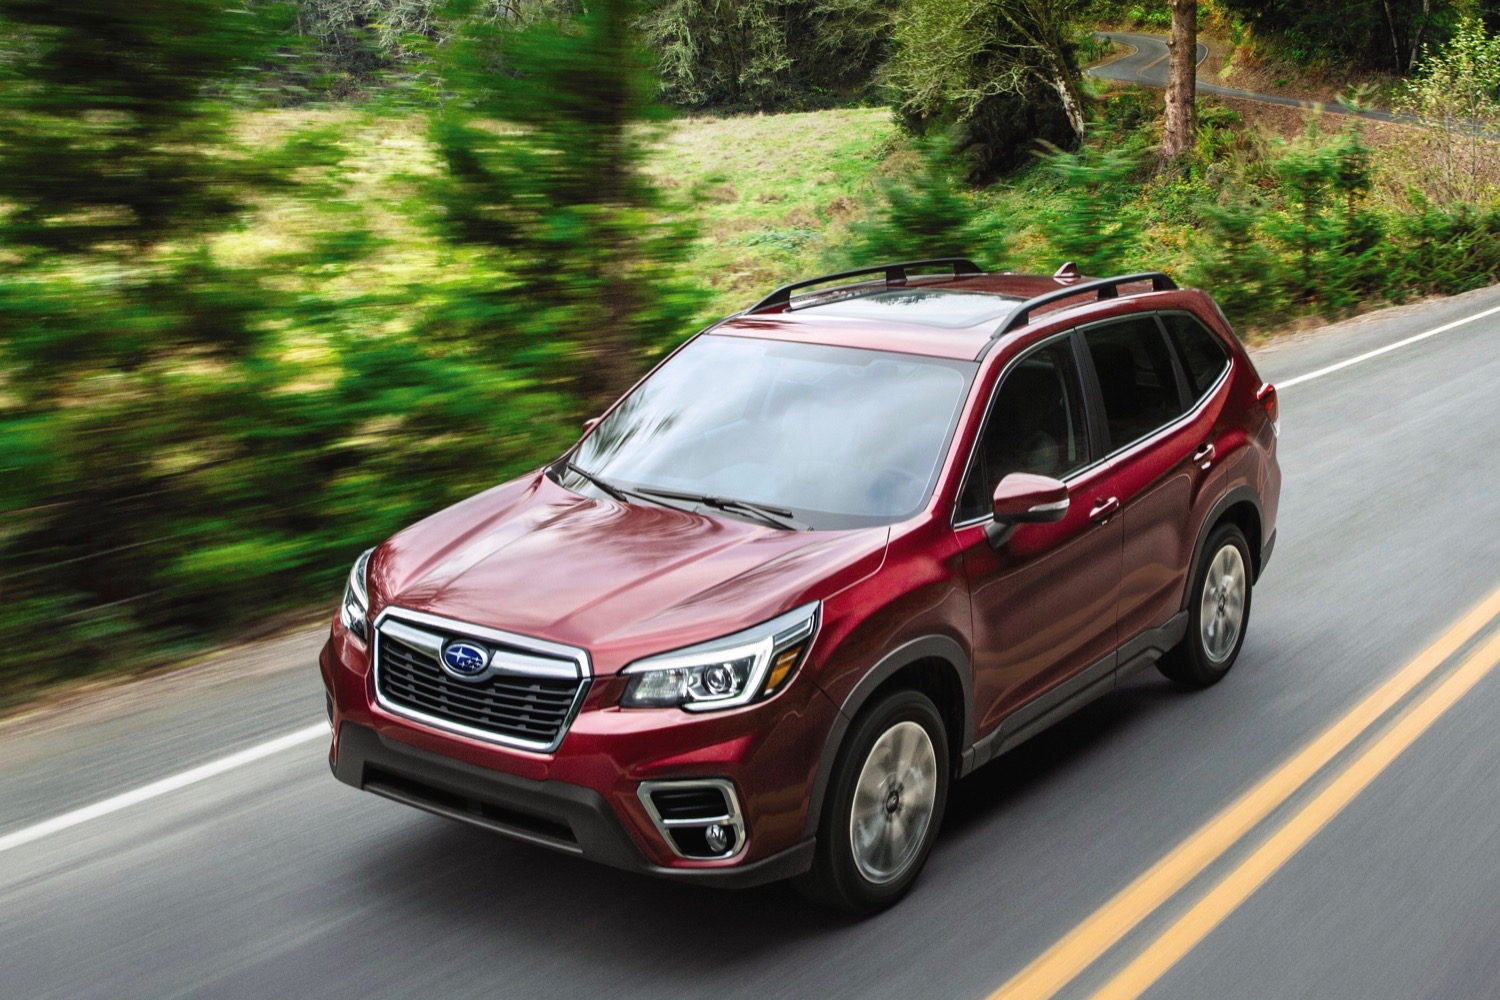 2020 Subaru Forester Priced From $25,505, Gets More Safety Tech | Digital  Trends